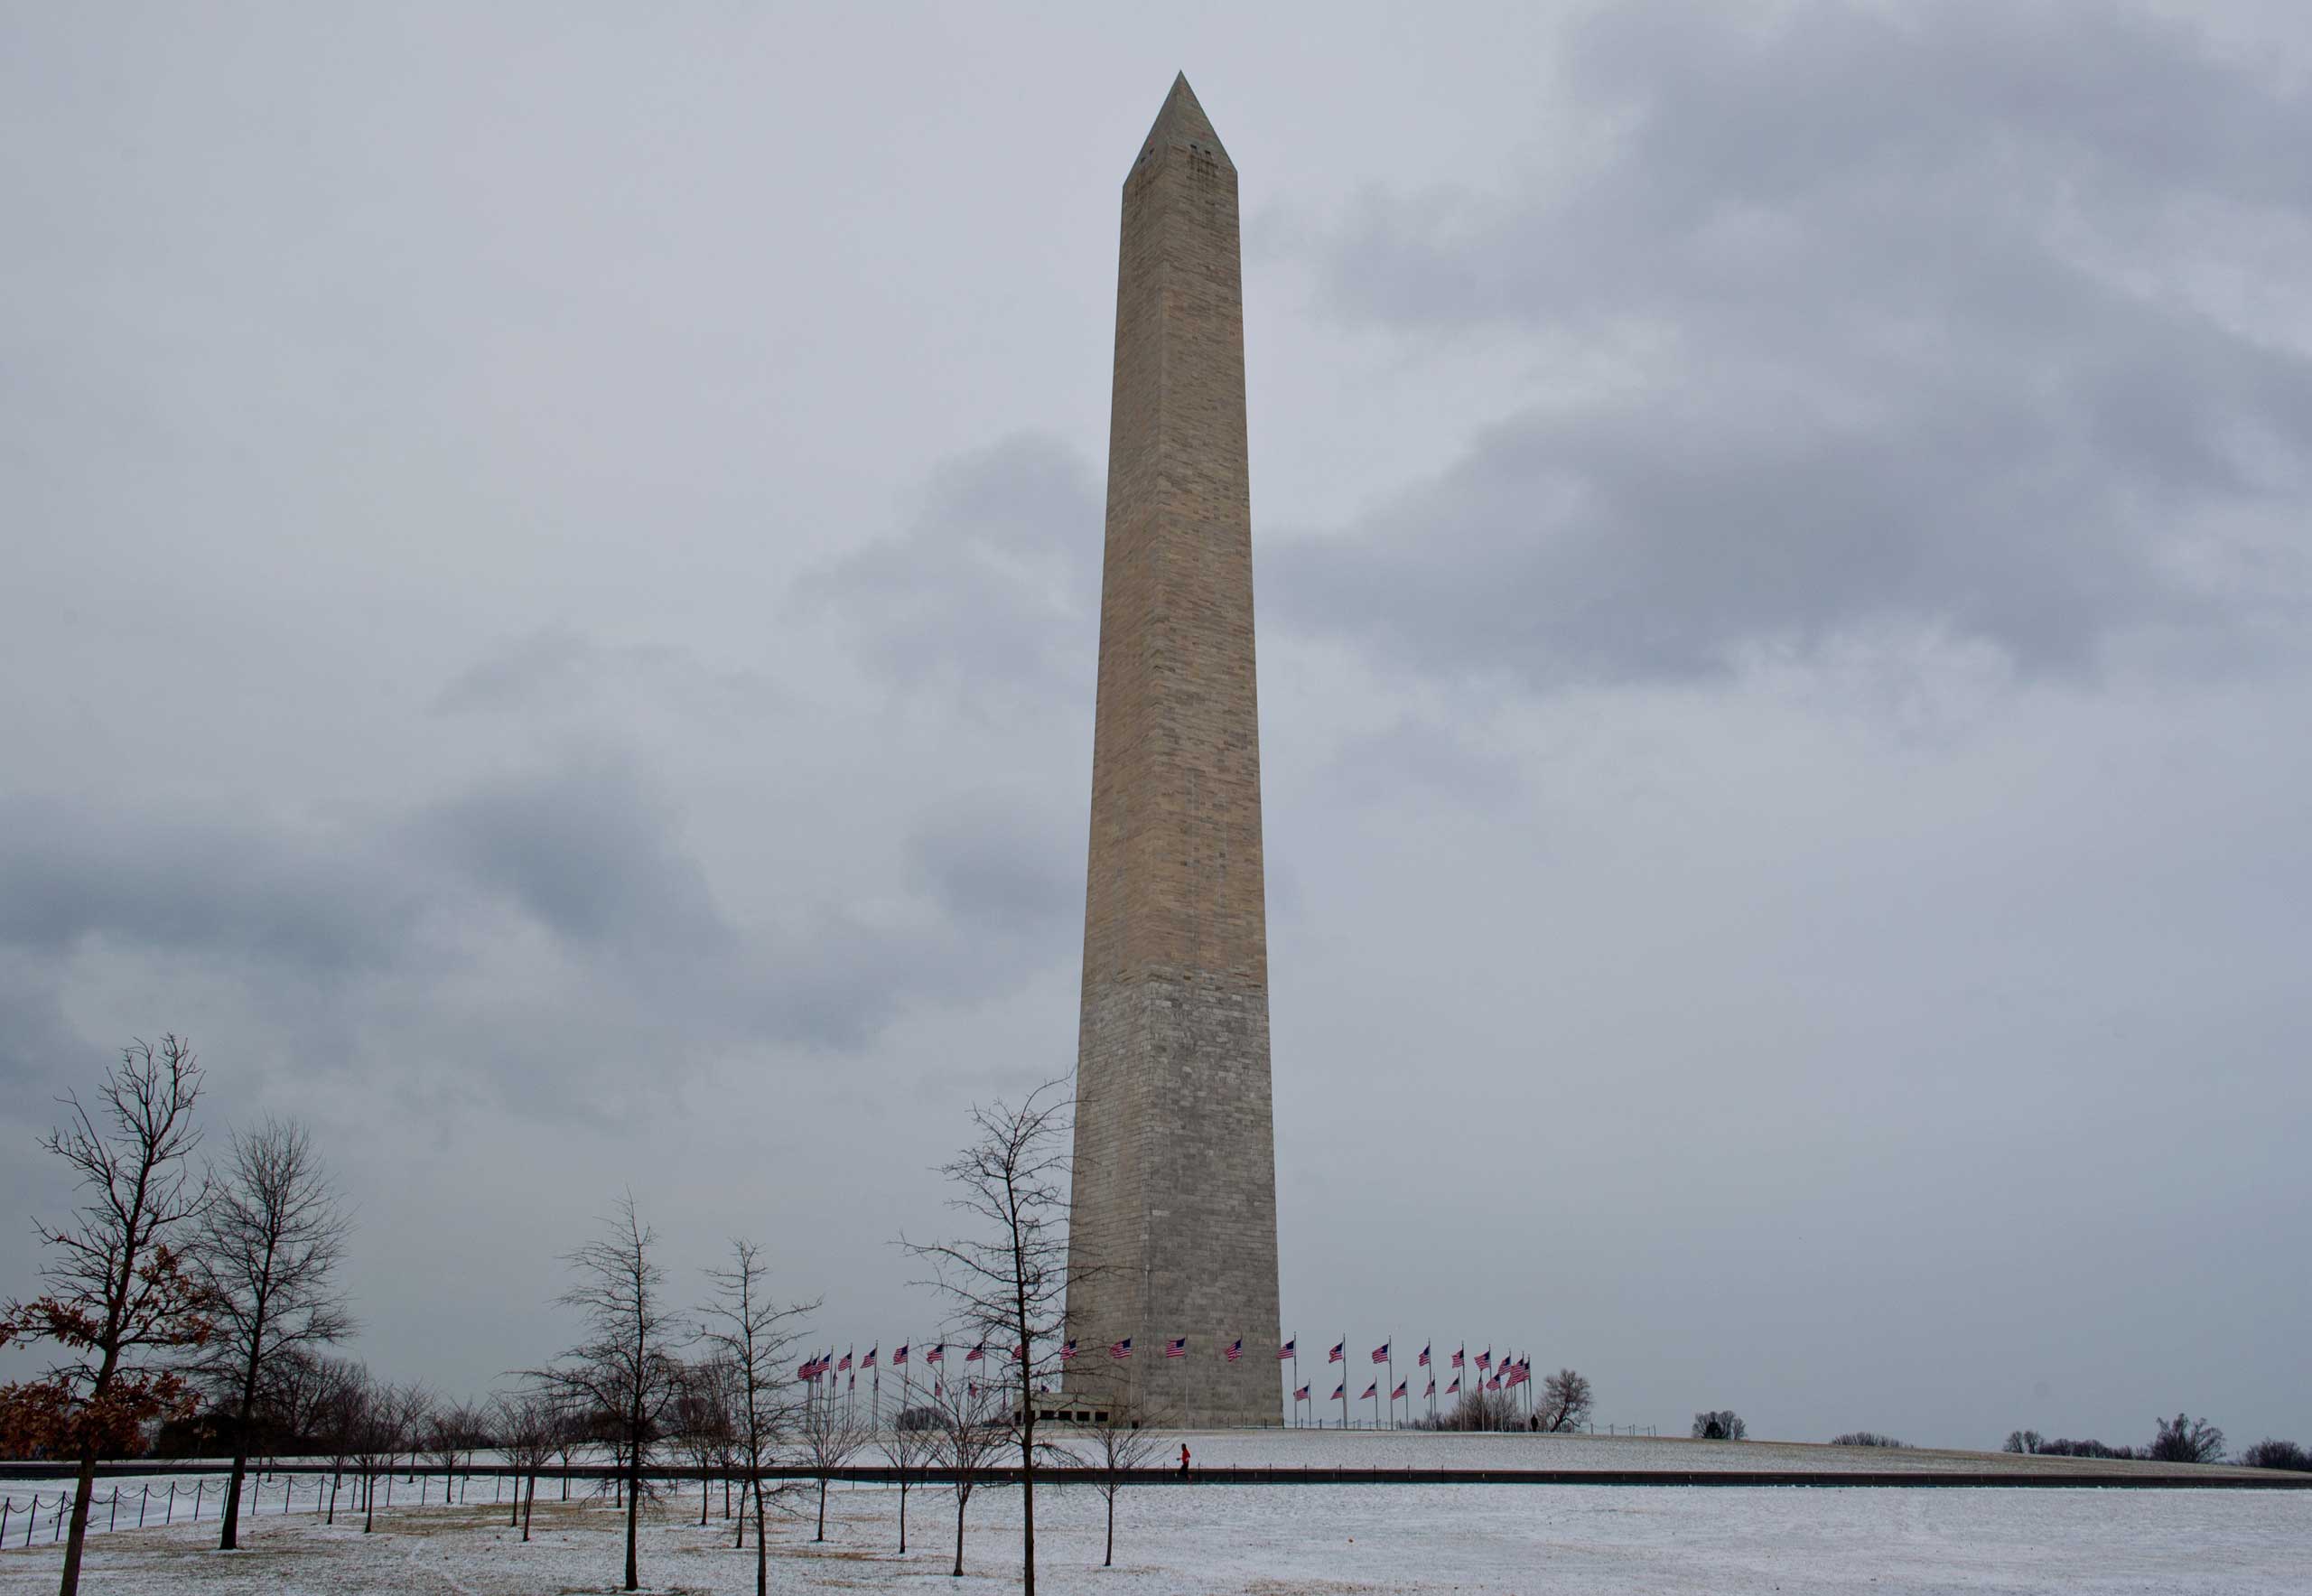 A jogger passes the Washington Monument on a cold blustery morning January 27, 2015 in Washington, DC. (Karen Bleier—AFP/Getty Images)